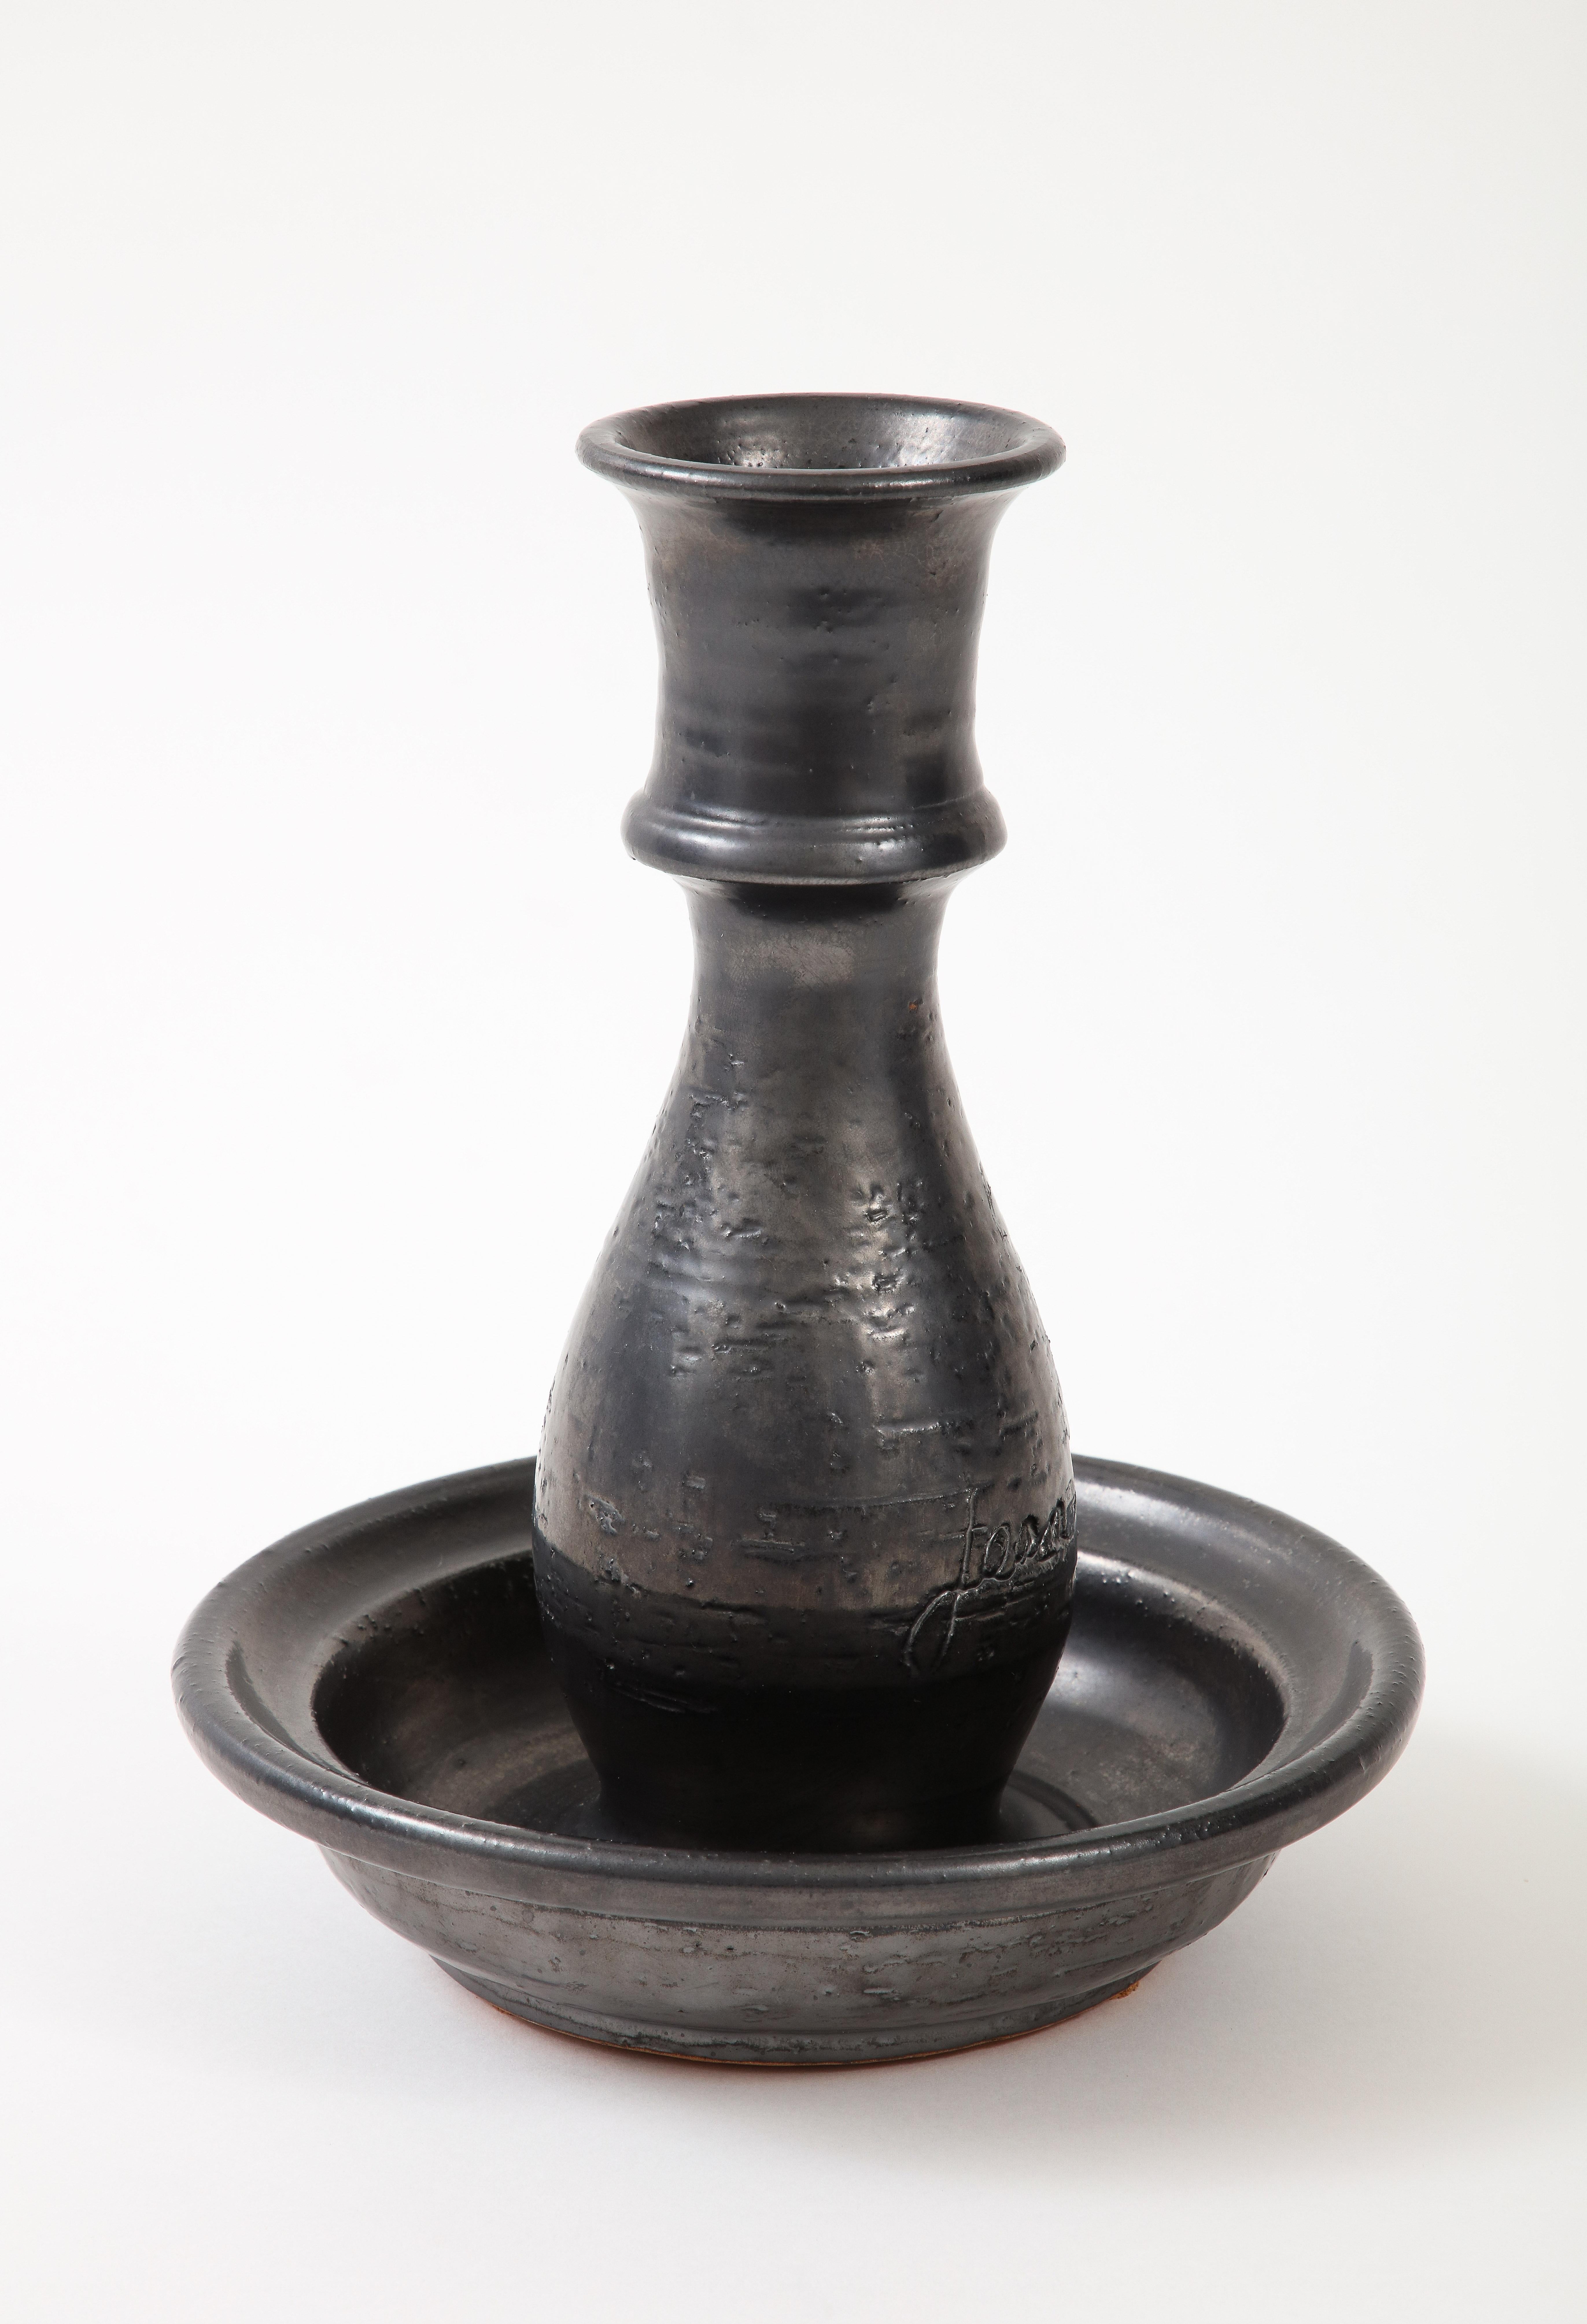 Jean Marais (1913-1998), Signed “Jean Marais’, France, c. 1950
candlestick, black enamel glaze, Vallauris red clay
Measures: height: 10, diameter 8.5 in.

Jean Marais was a French Movie Star, Heart-throb, and the Muse nad Boyfriend of Jean